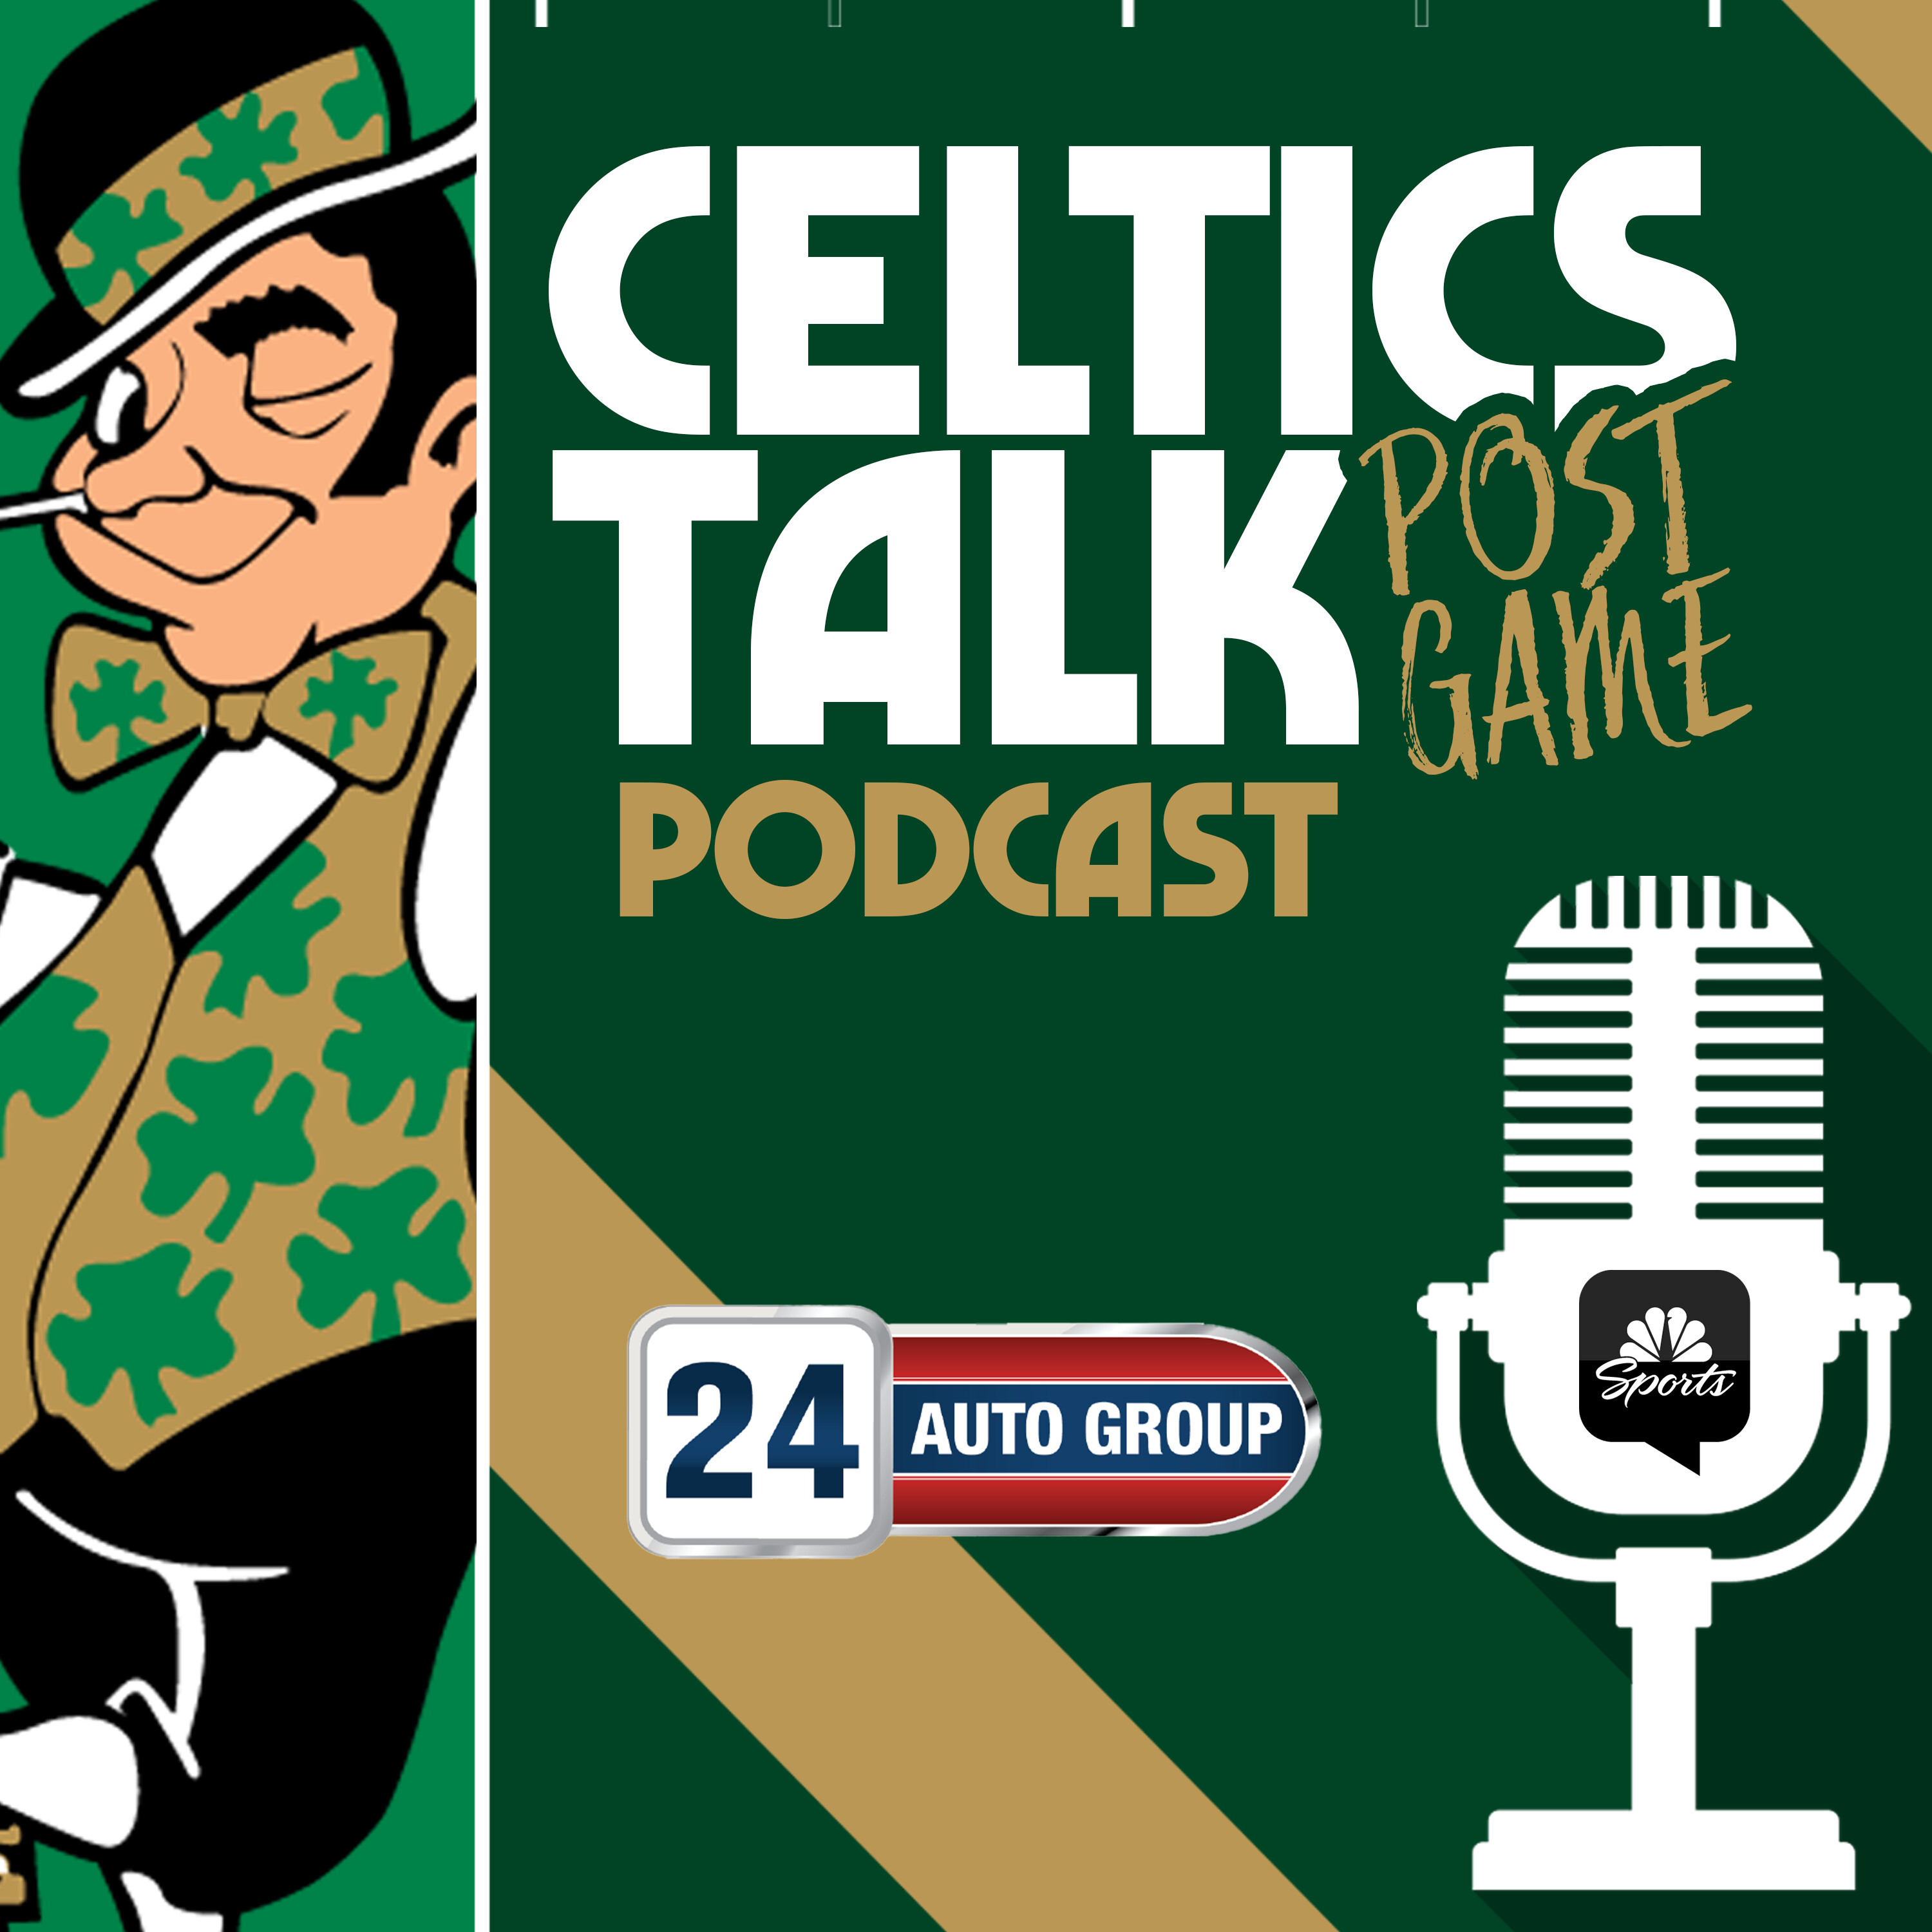 POSTGAME POD: No Tatum, no problem! Shorthanded C’s overcome sloppiness to ’steal’ win vs. Raptors